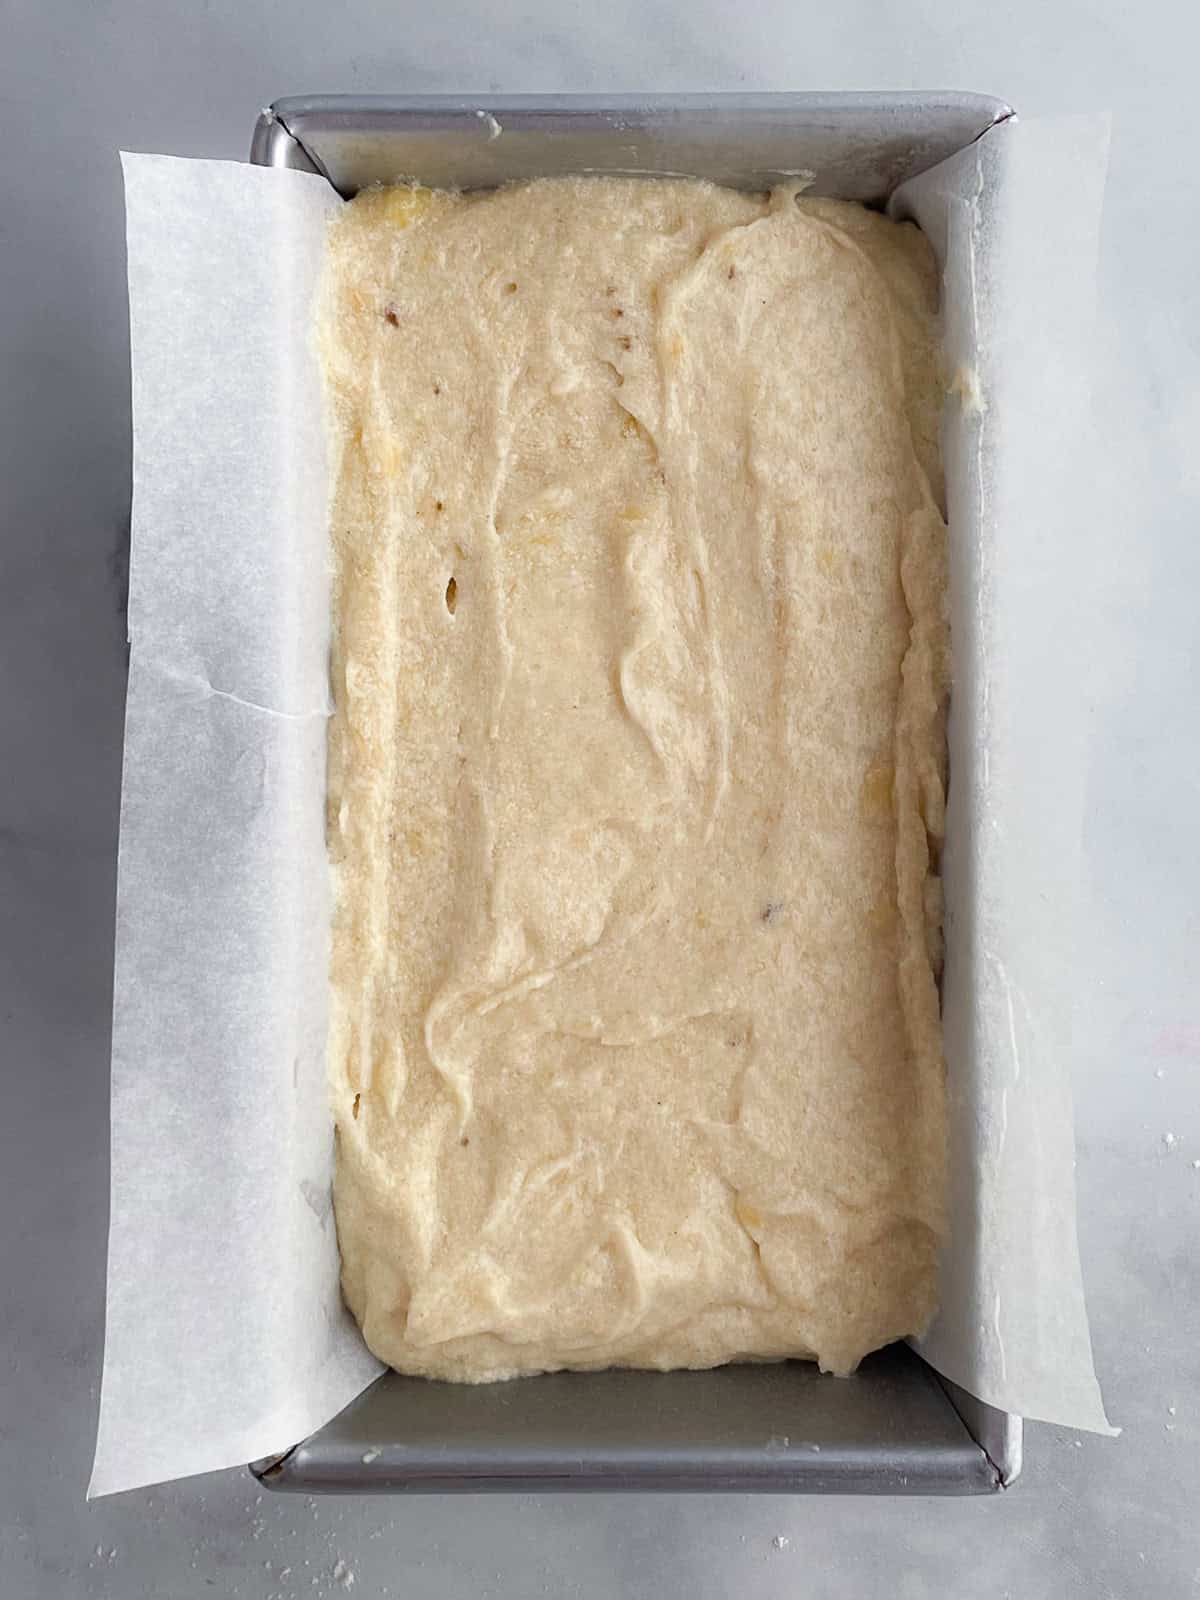 Gluten-free banana bread batter in a loaf pan that's been lined with parchment paper.